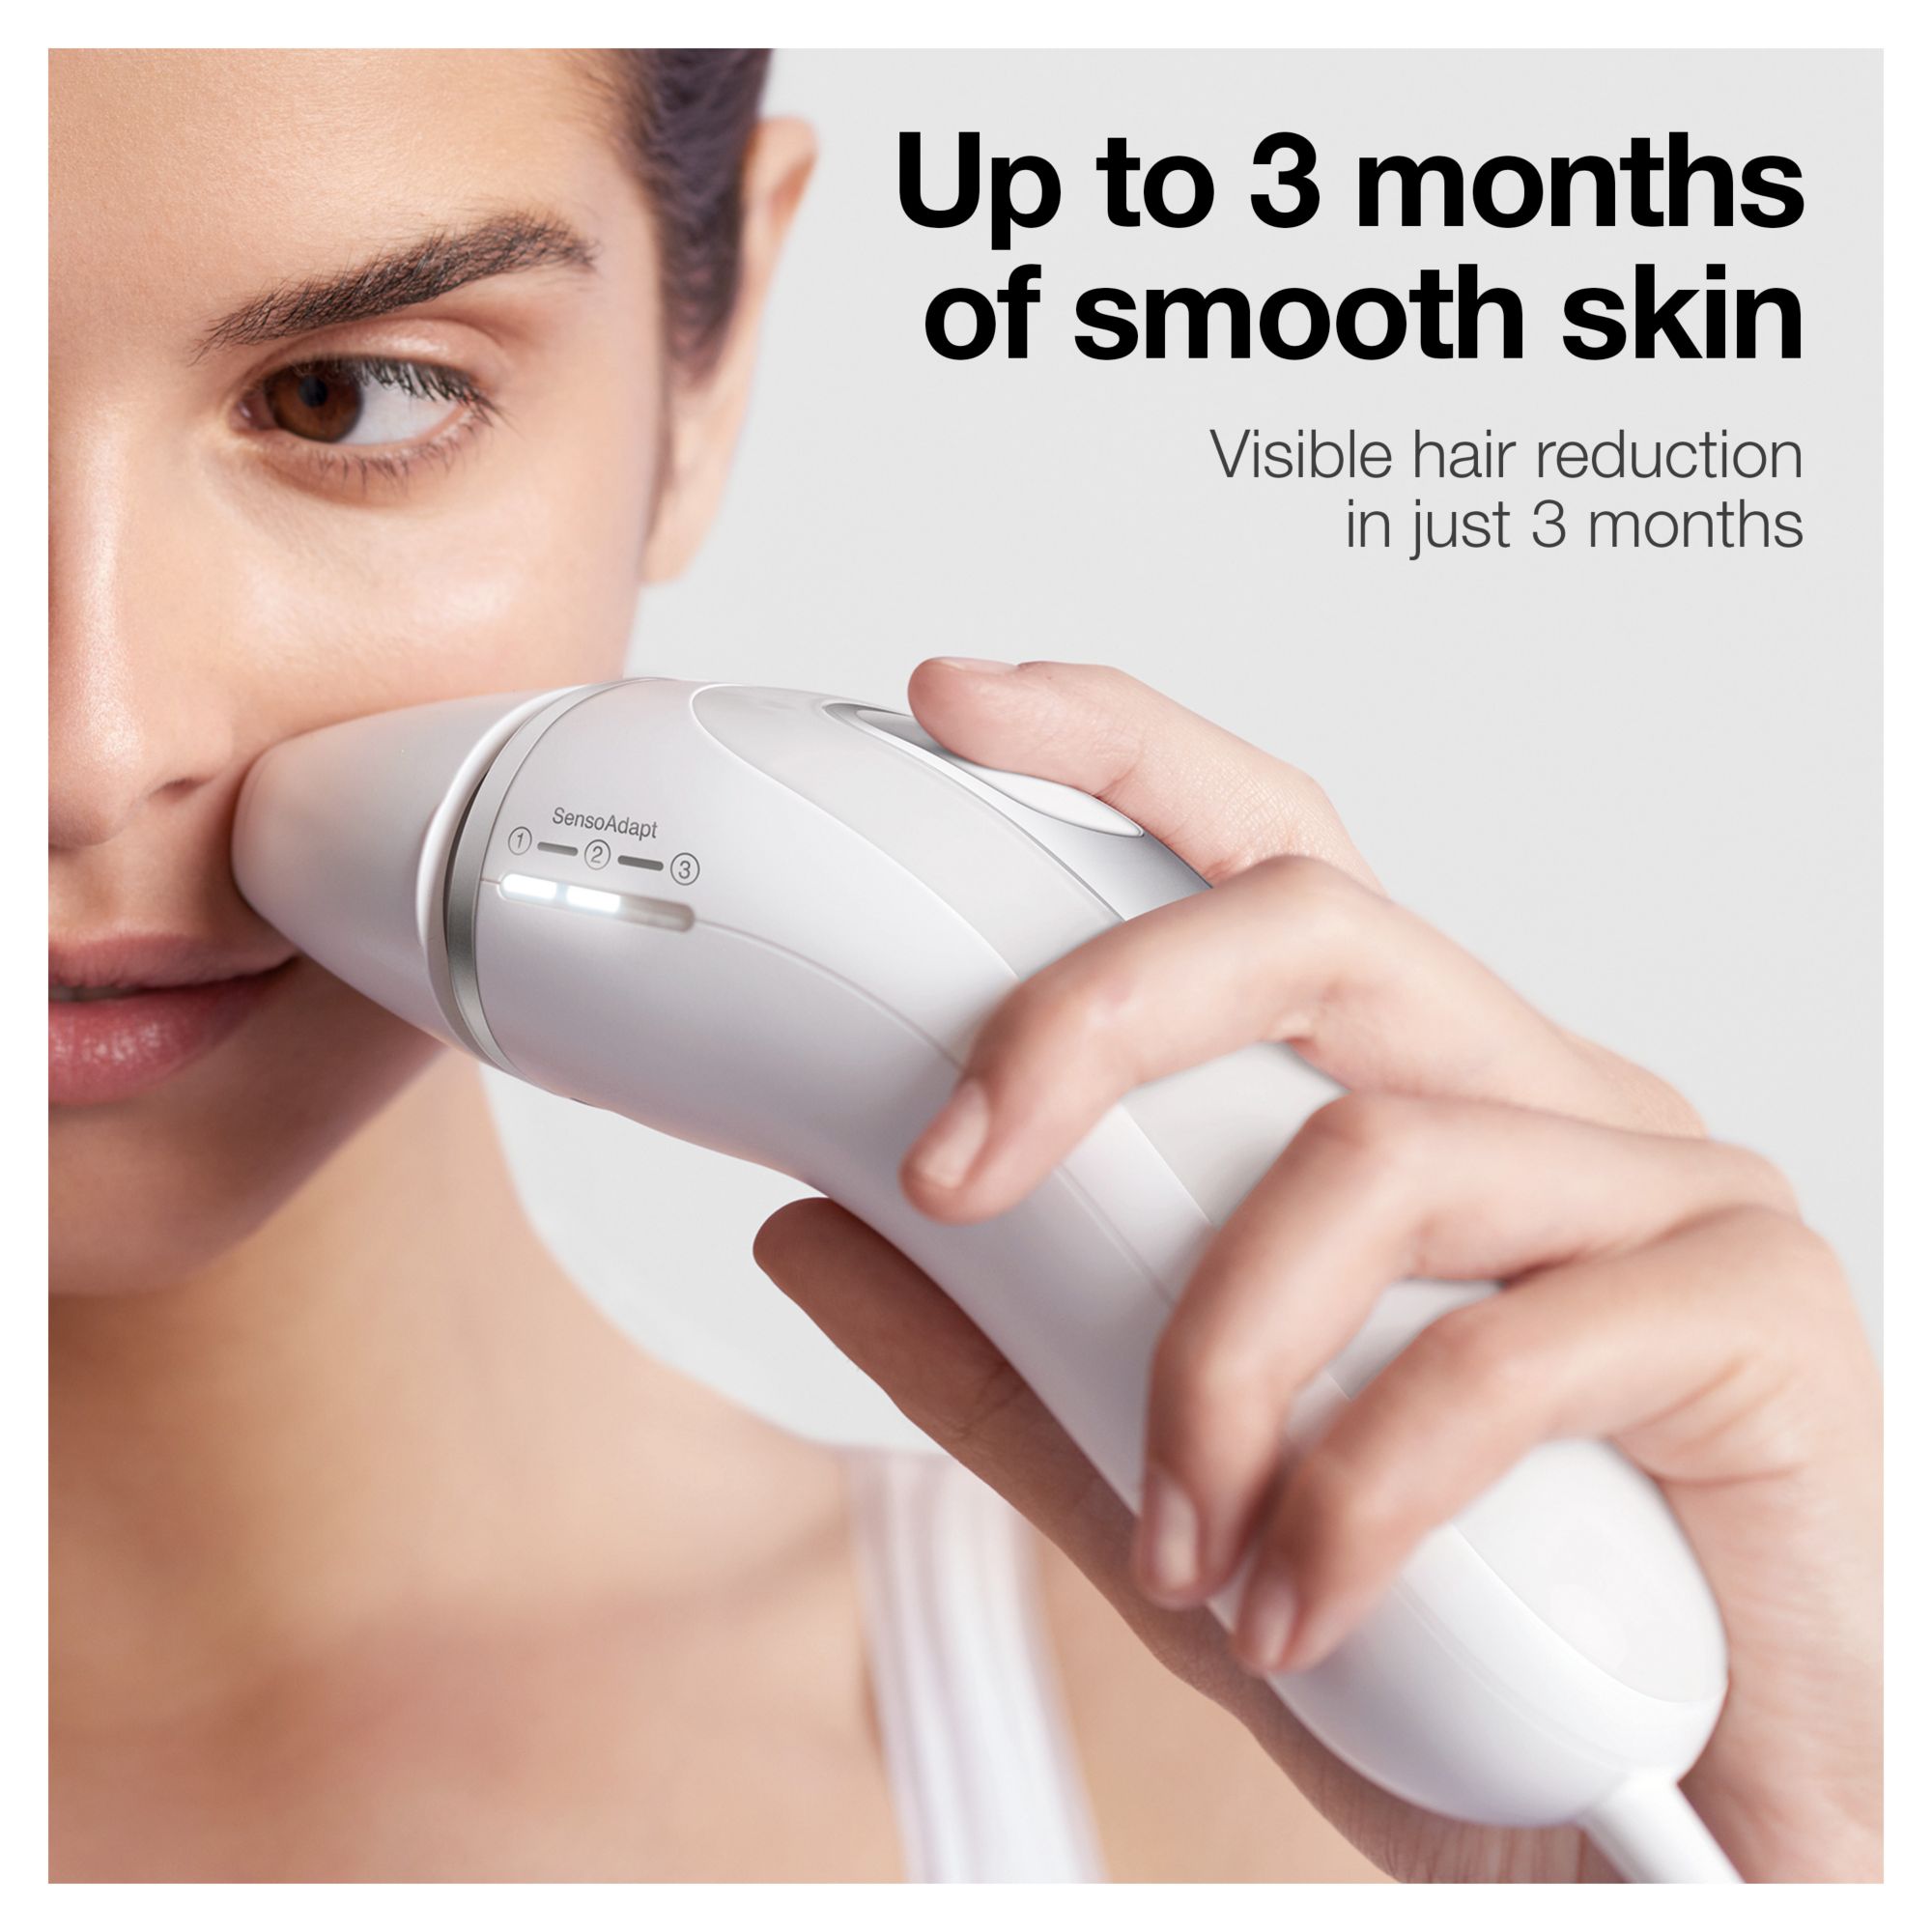 & Braun IPL Silk | BJ\'s At-Home System Women Club Wholesale Removal Hair 3 Expert for Pro Men